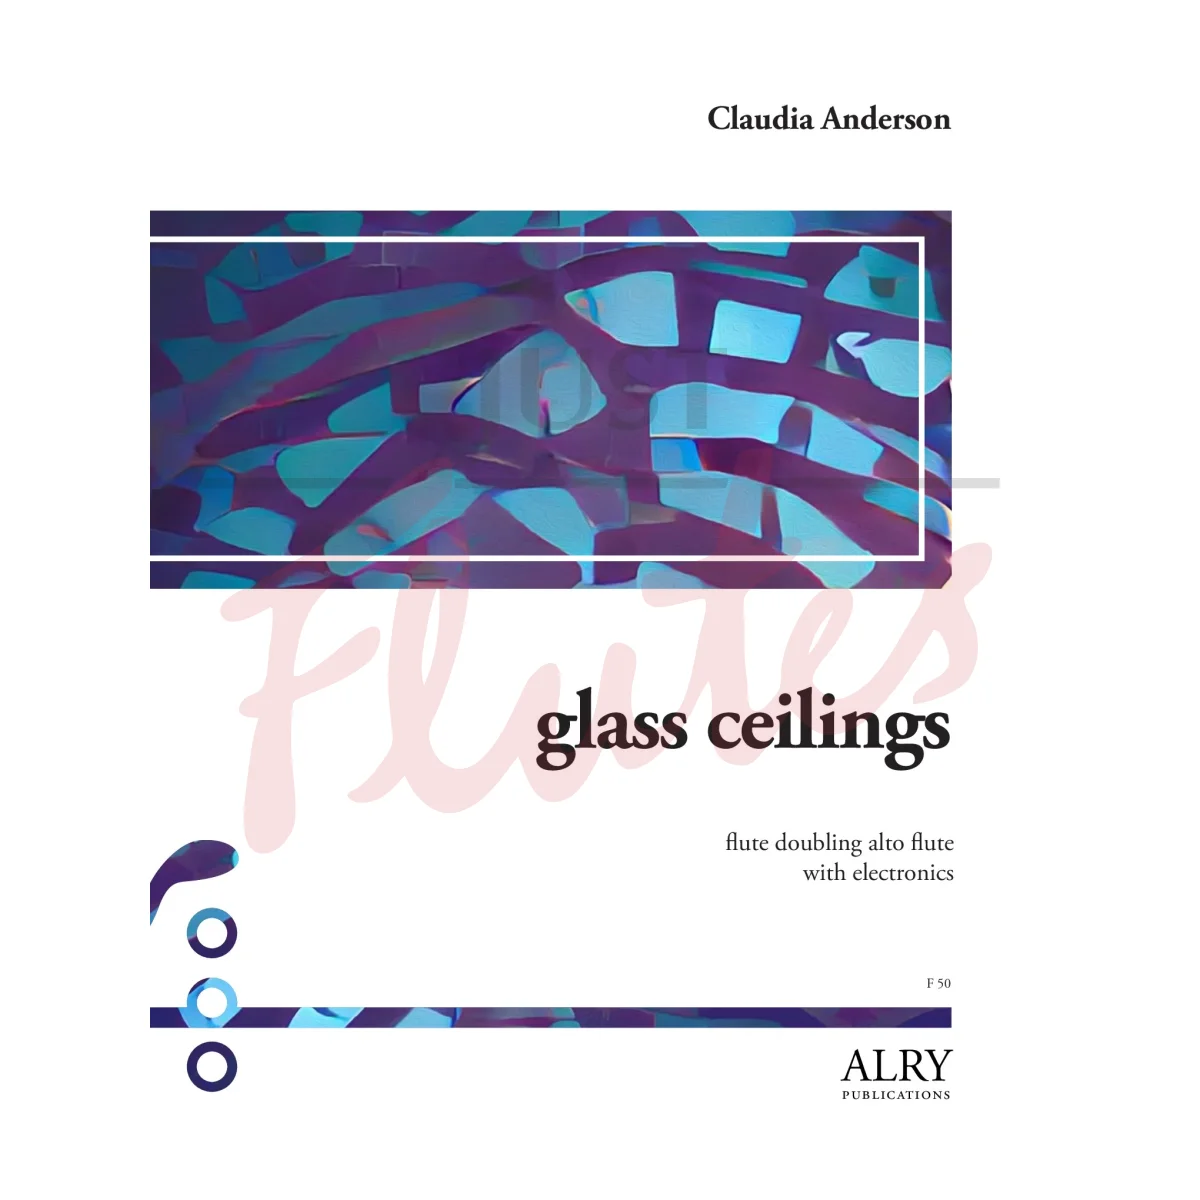 Glass Ceilings for Flute (doubling Alto Flute) with Electronics